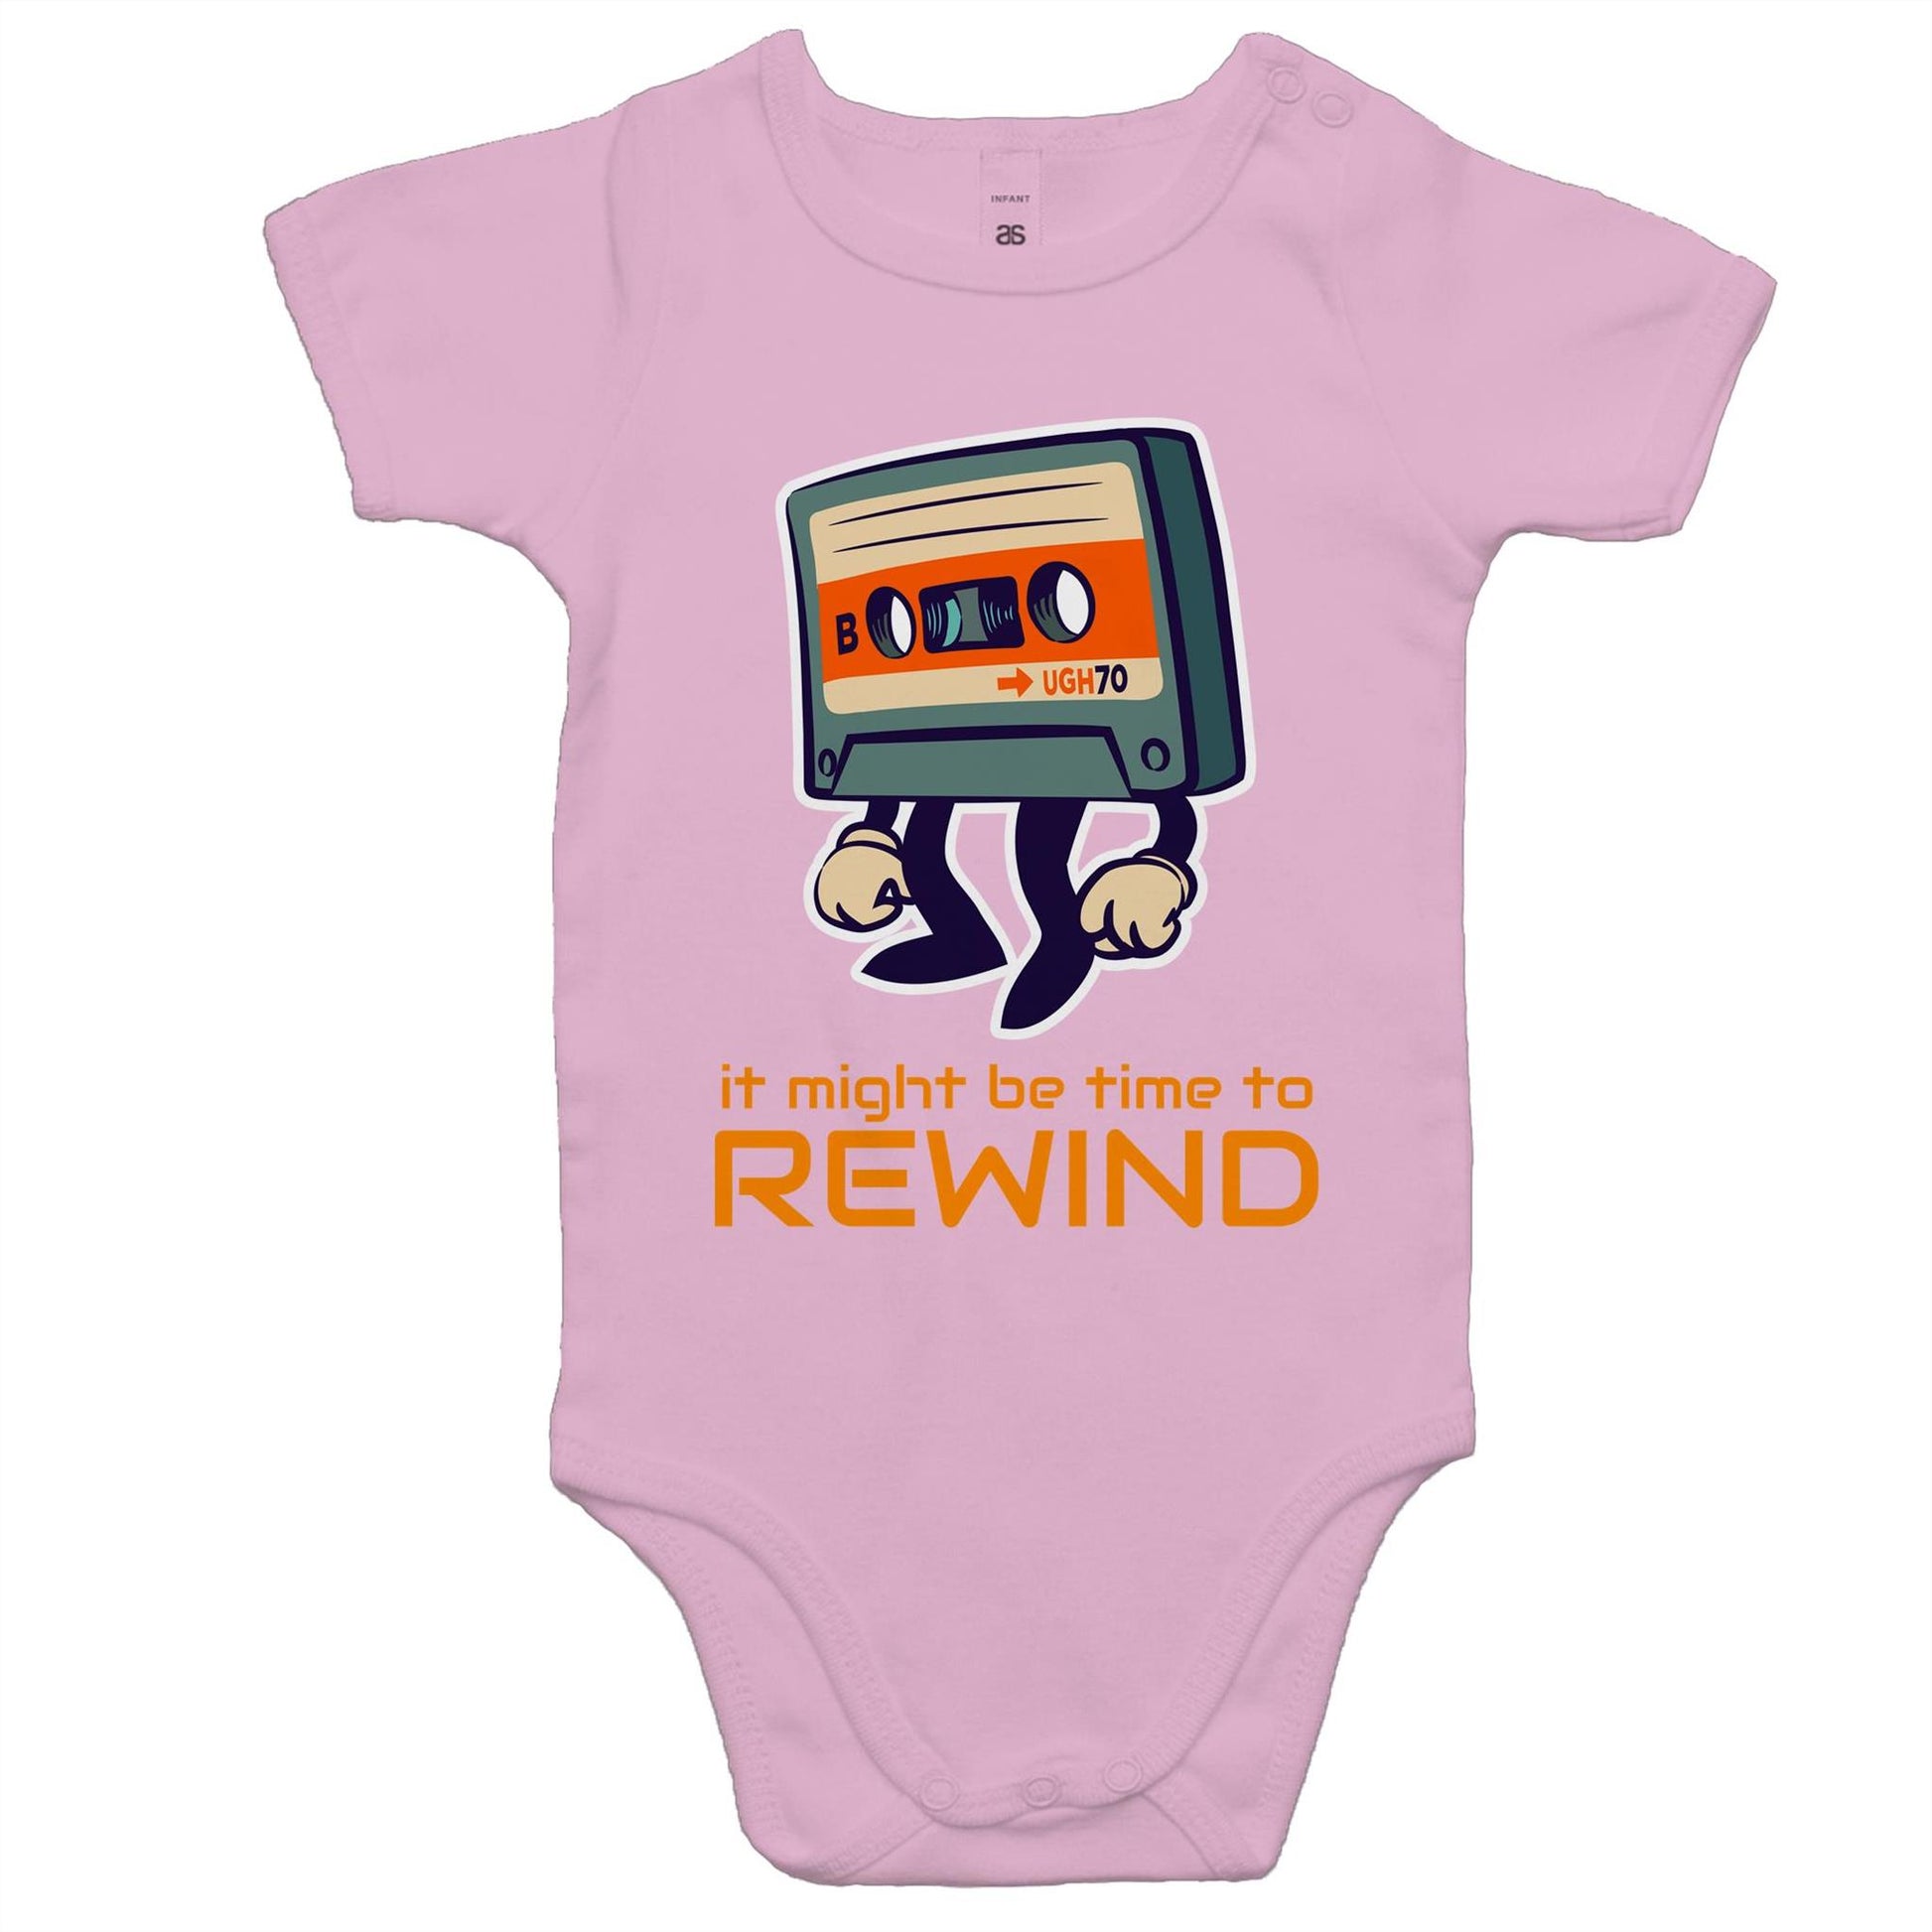 It Might Be Time To Rewind - Baby Bodysuit Pink Baby Bodysuit Music Retro